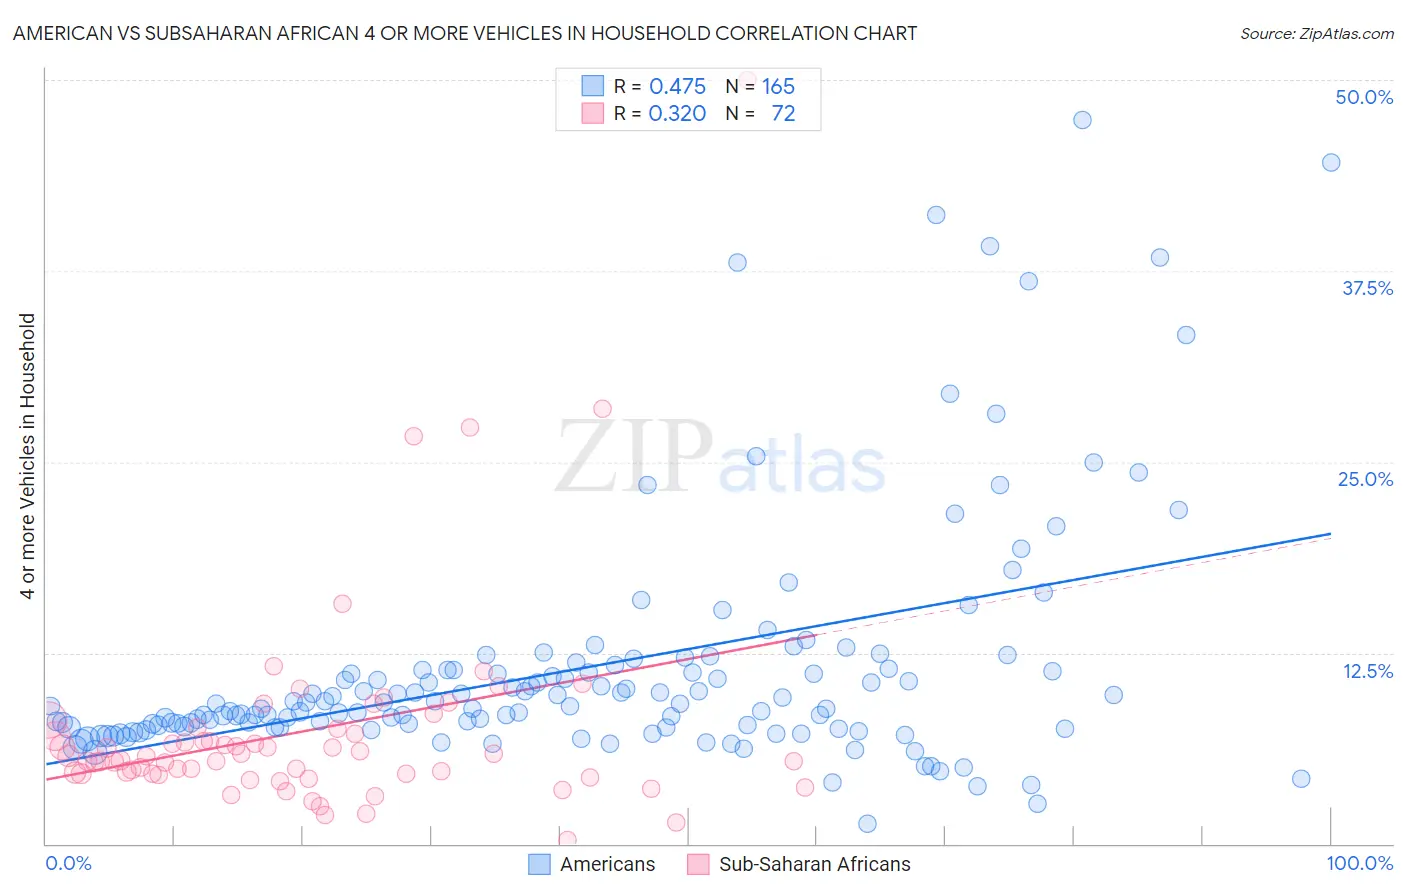 American vs Subsaharan African 4 or more Vehicles in Household